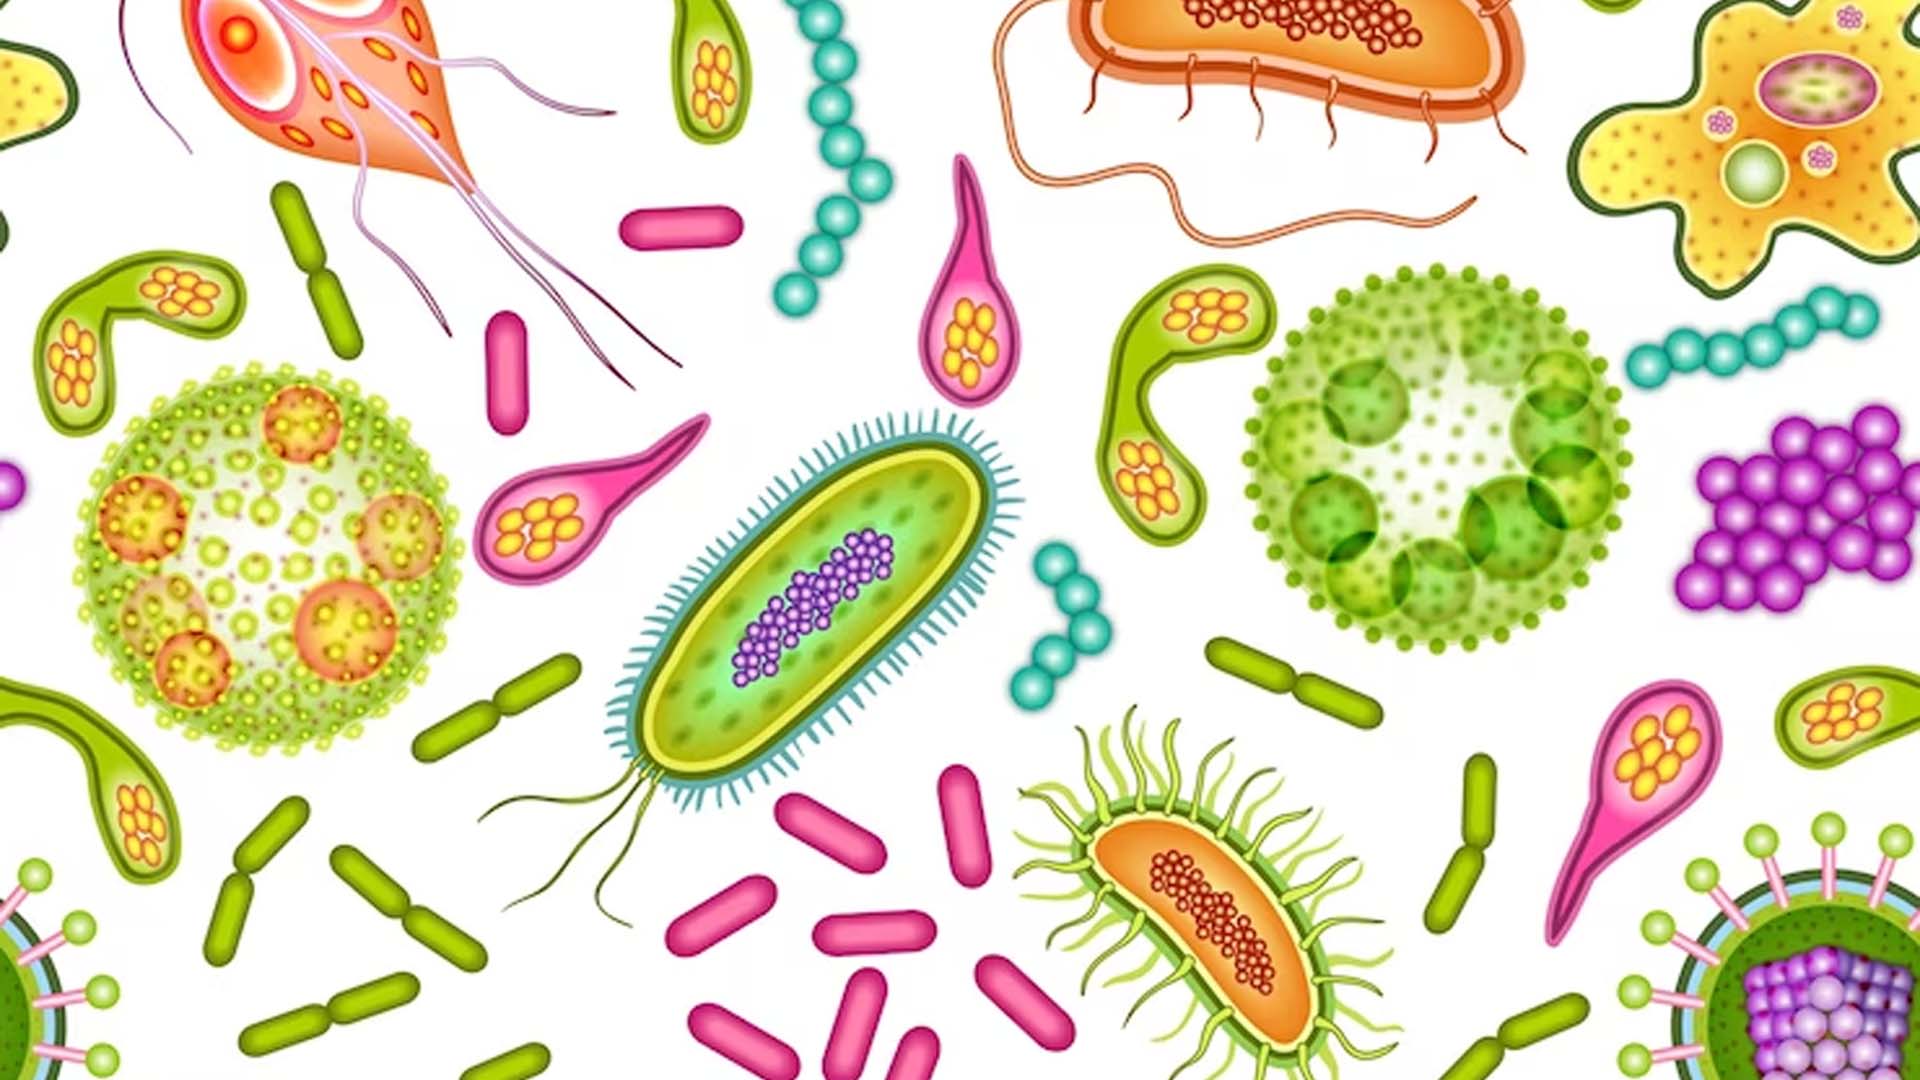 Which Diseases do Microorganisms Cause in Plants and Animals?